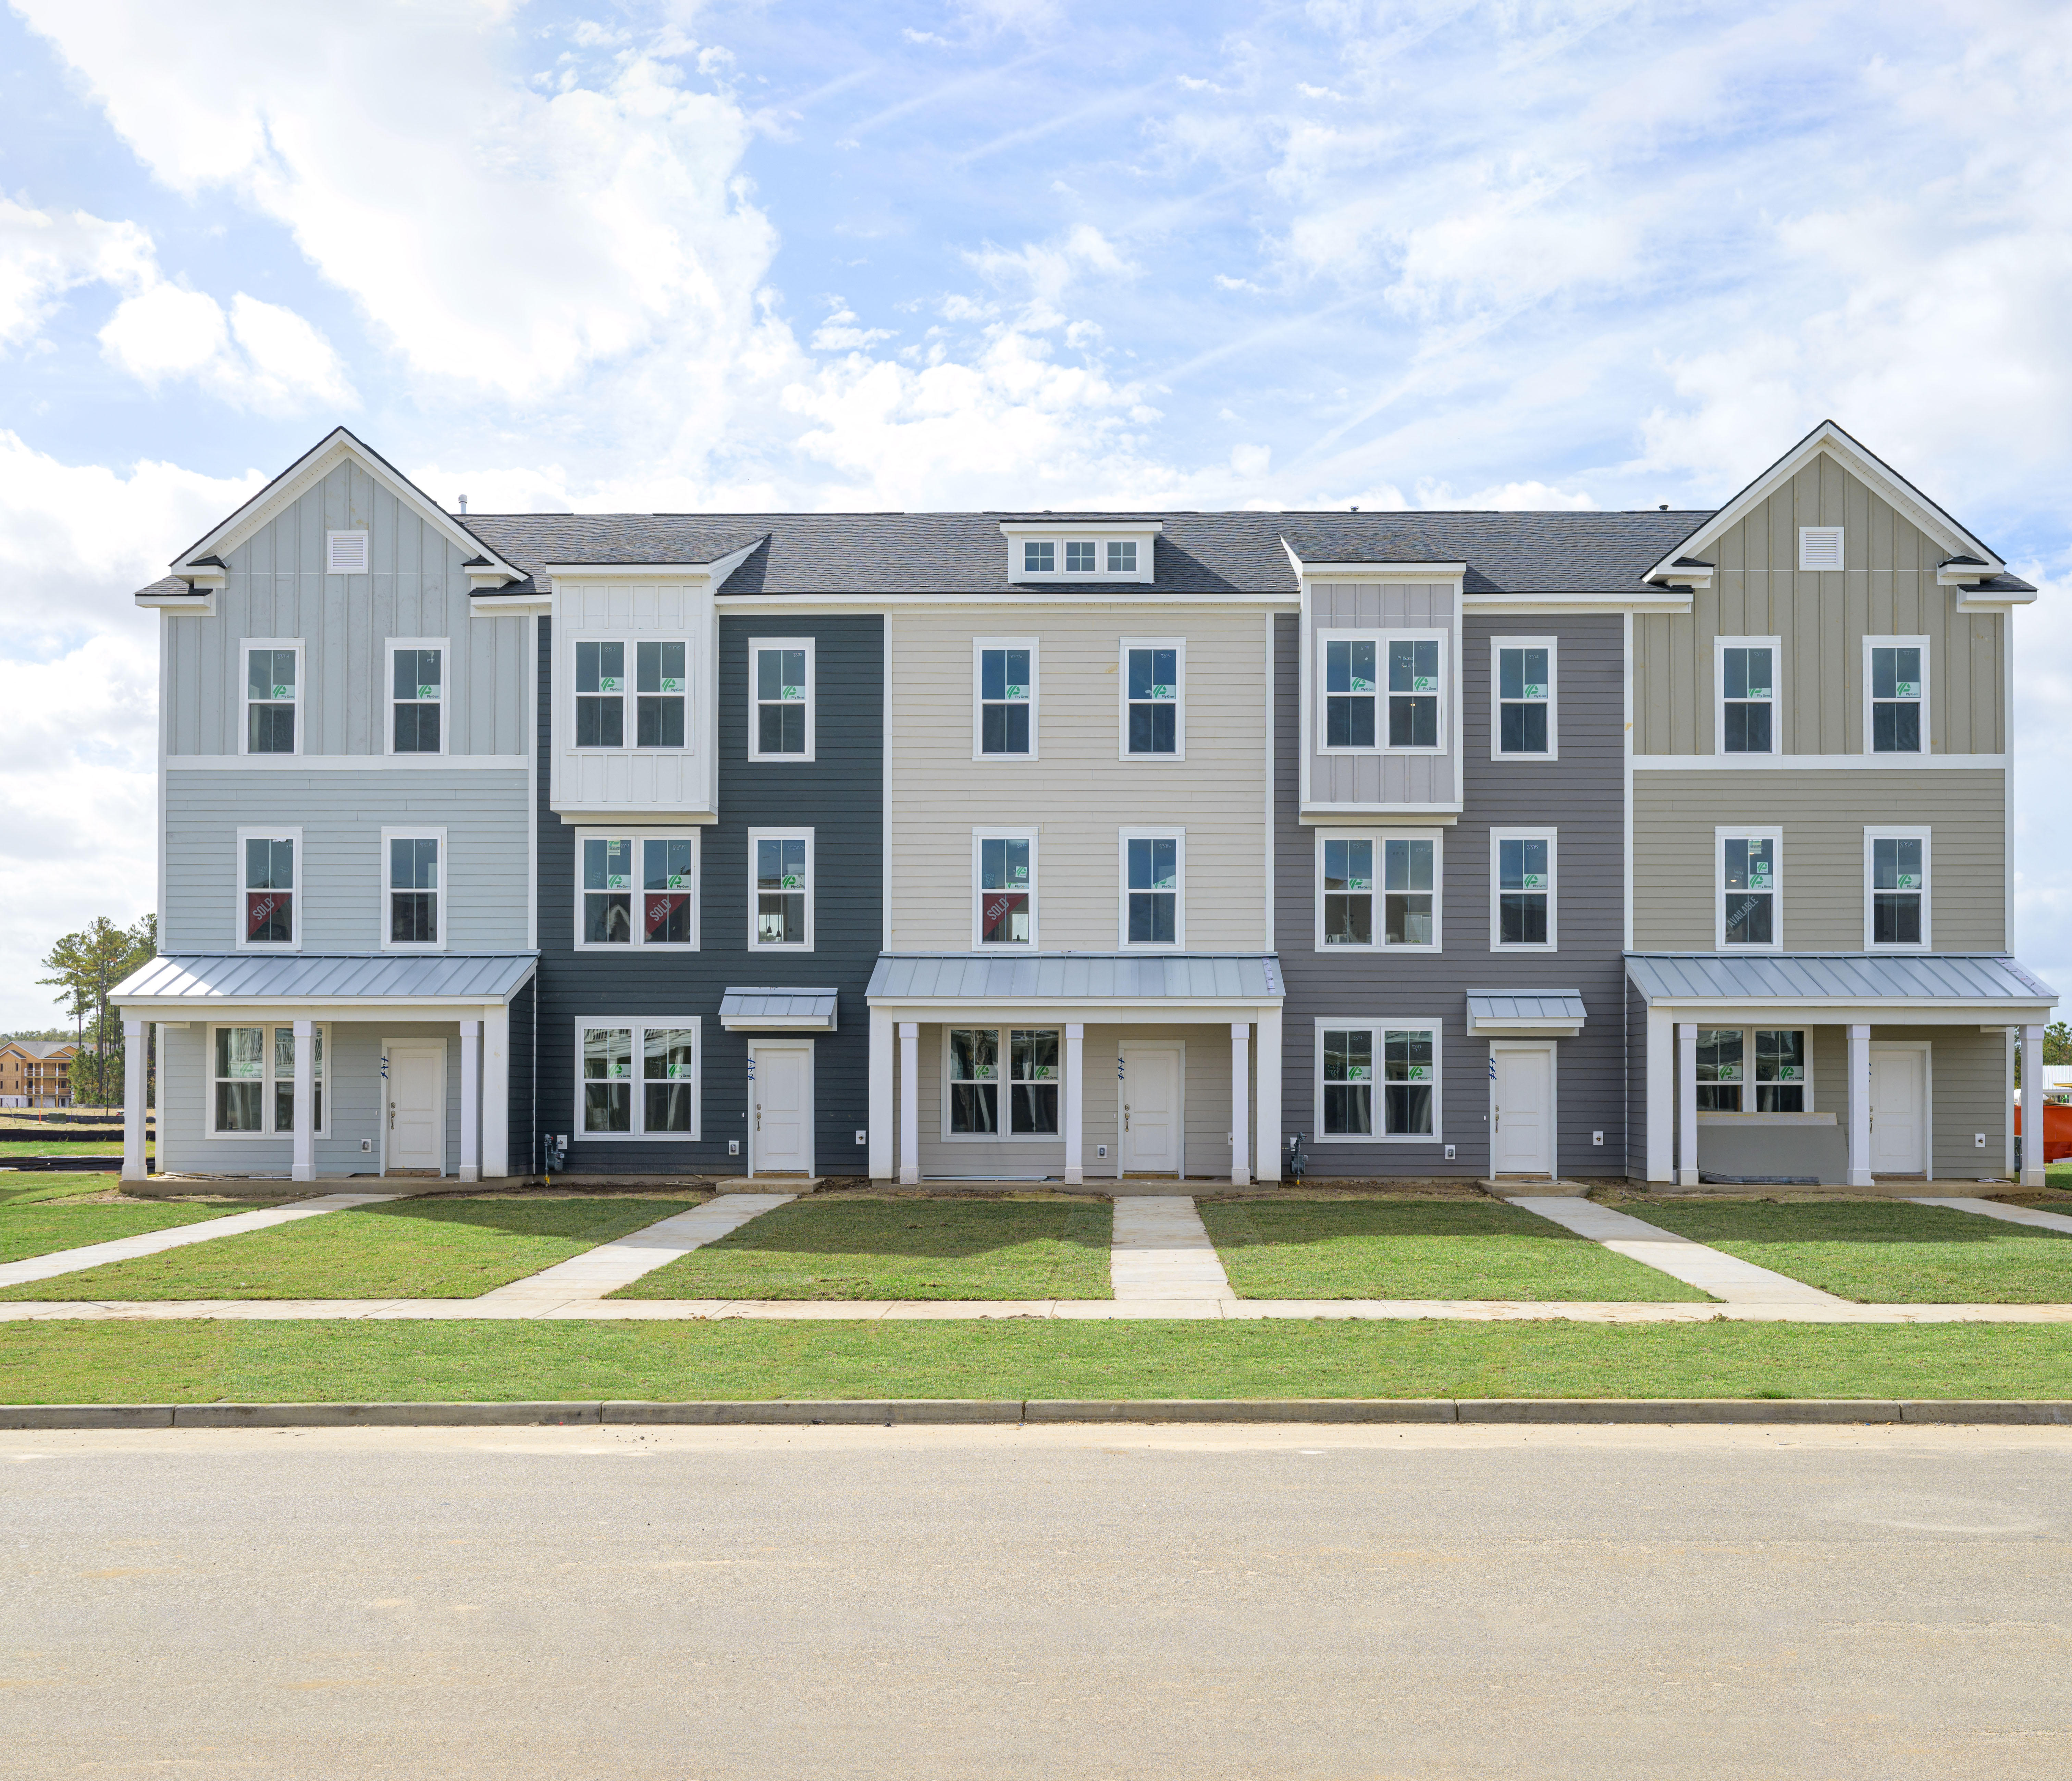 Five townhomes in DRB Homes Recess Pointe community